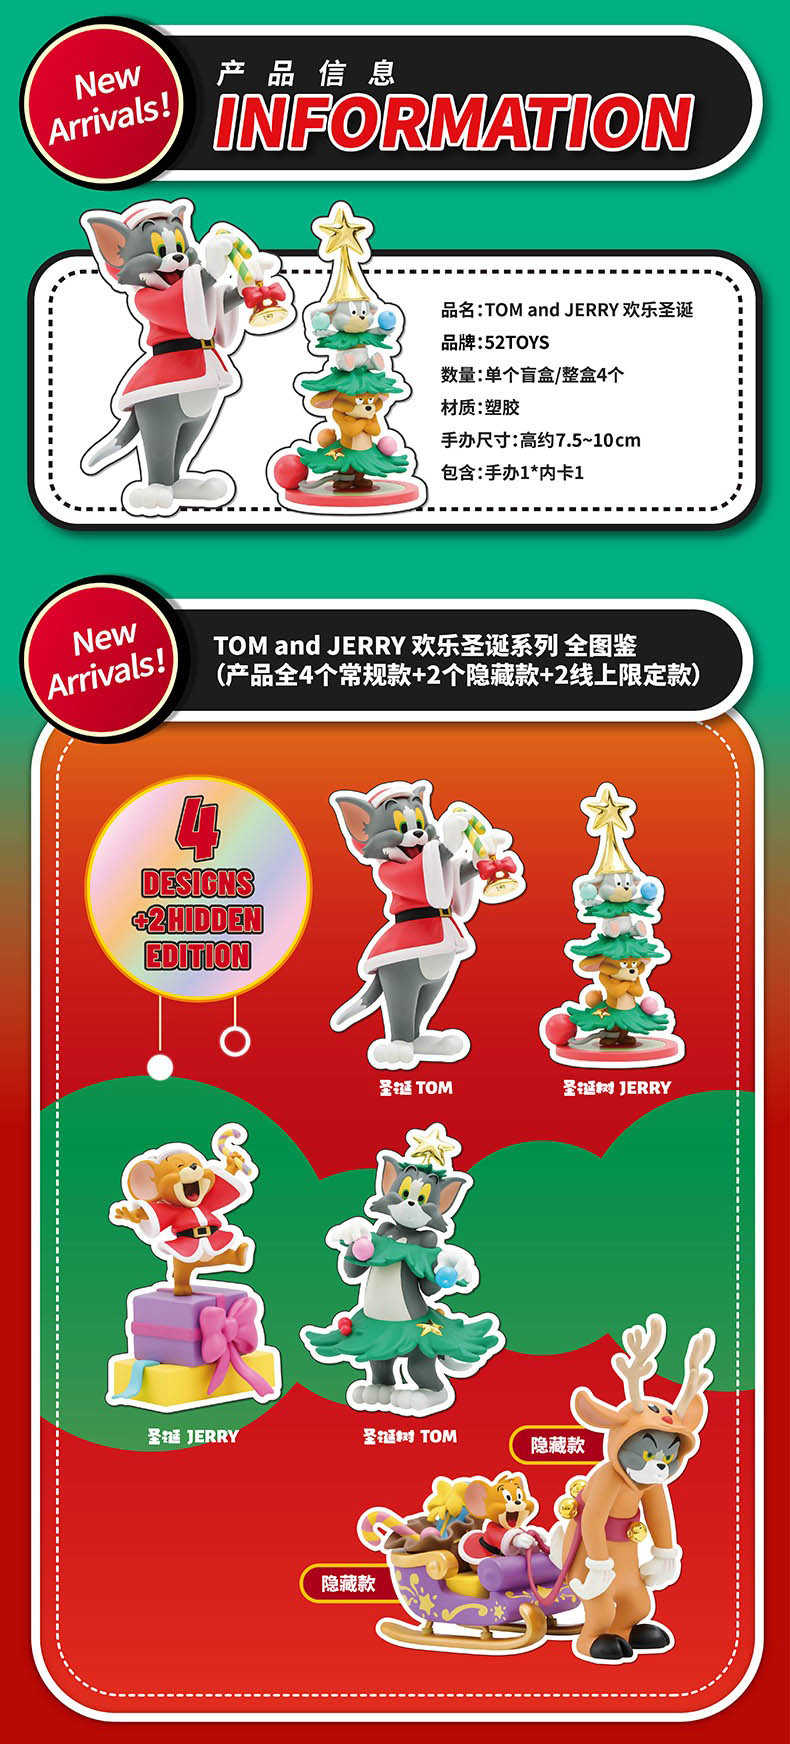 [52TOYS] TOM & JERRY - Merry Christmas SERIES BLIND BOX